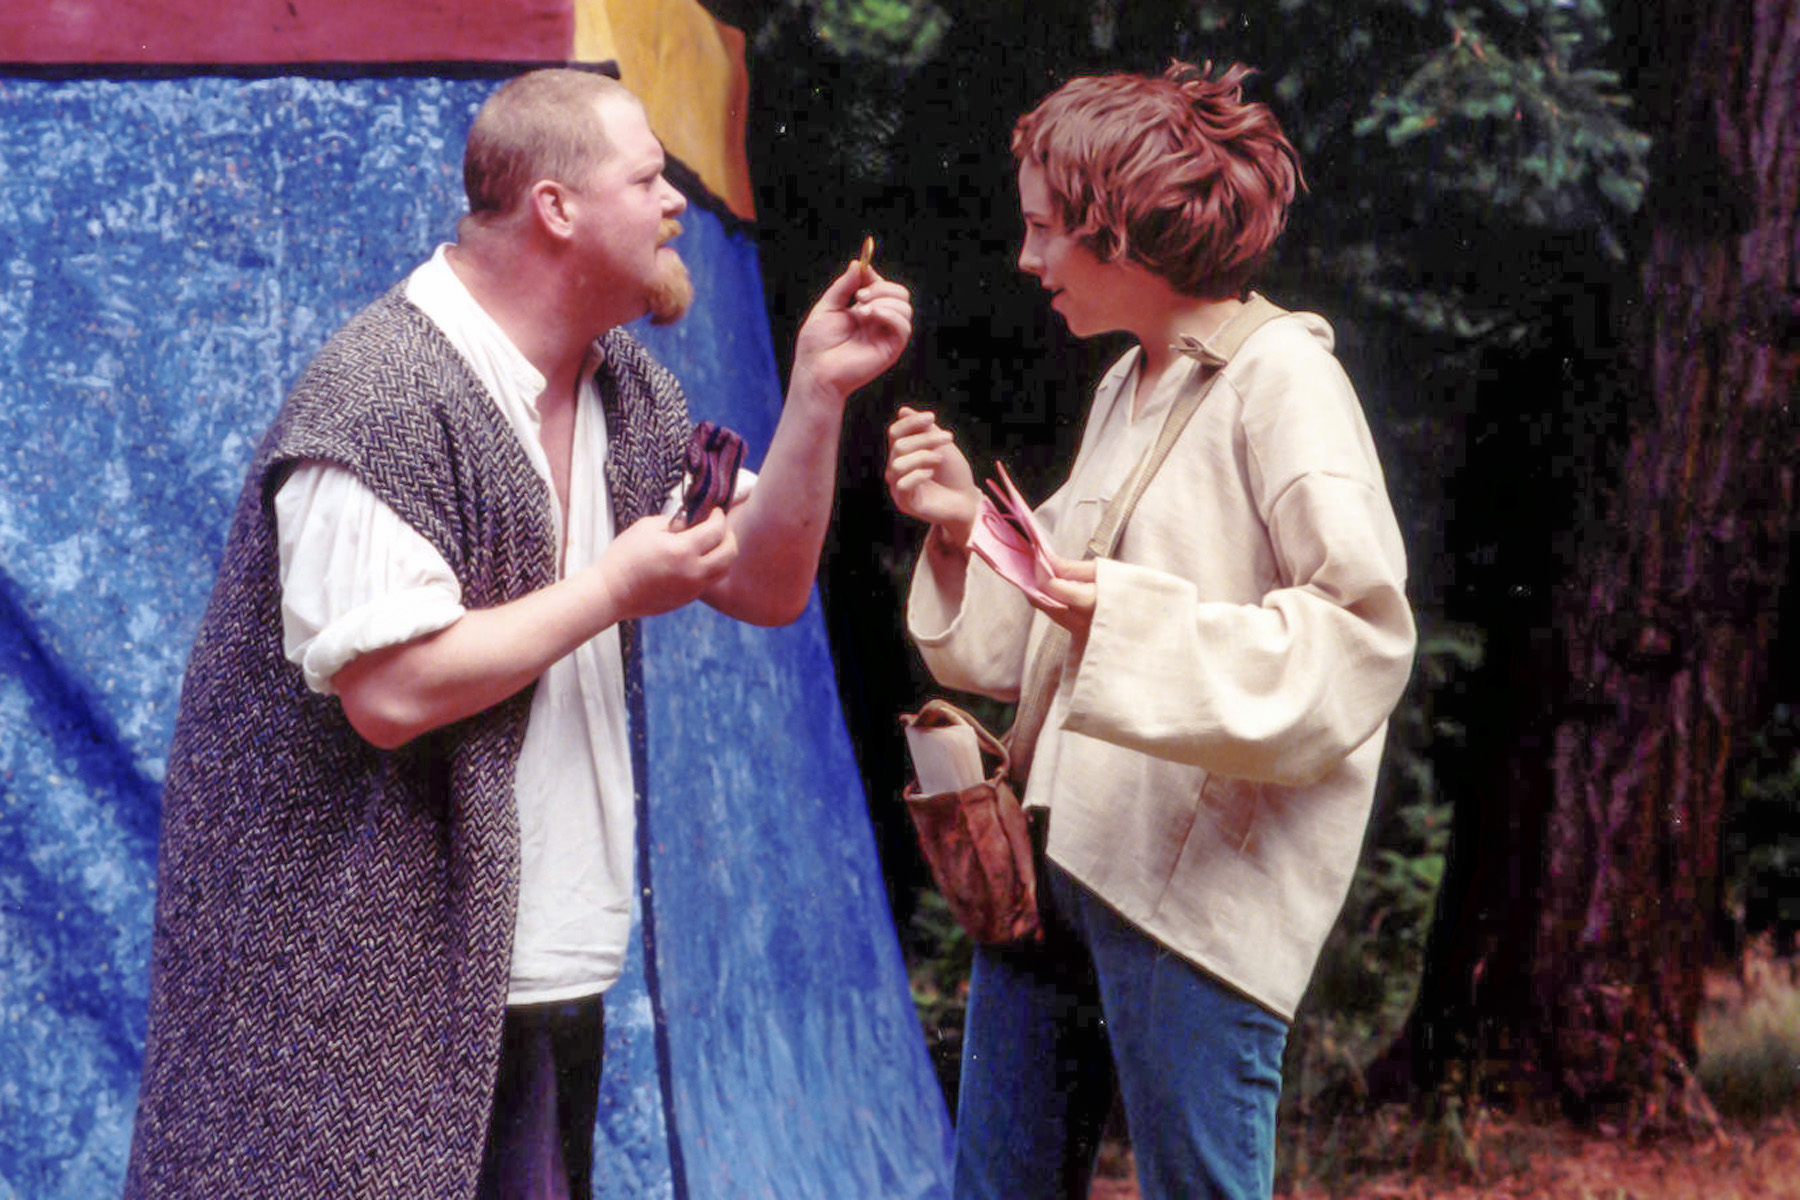 Don MacEllis and Jennifer Marley in The Merry Wives of Windsor - 2003